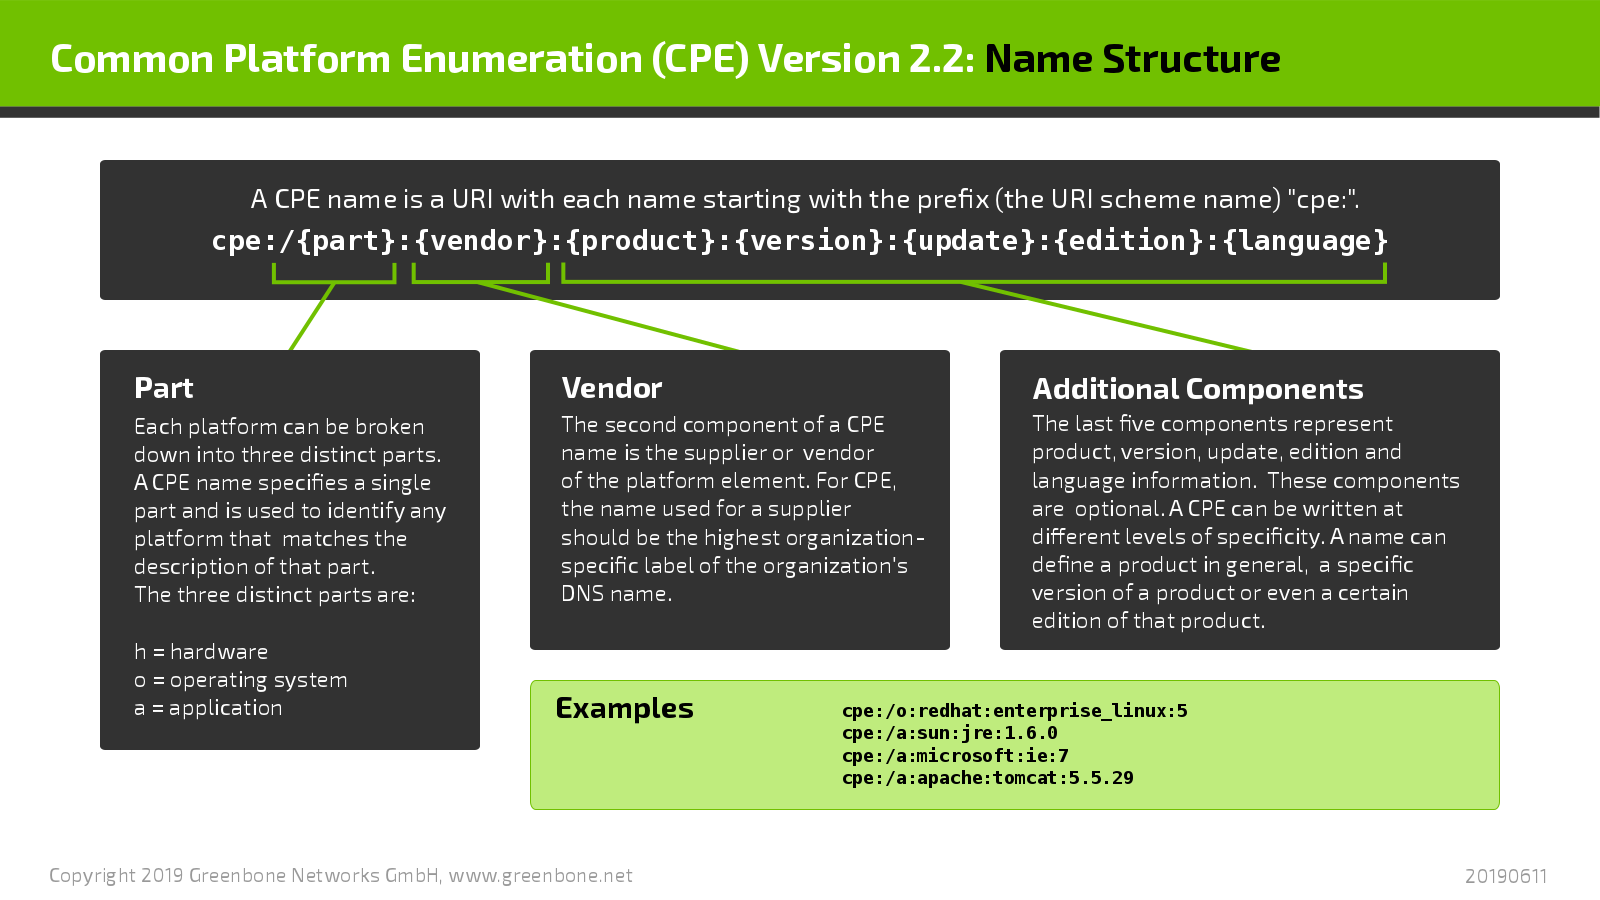 _images/cpe_name_structure_2000x1125.png